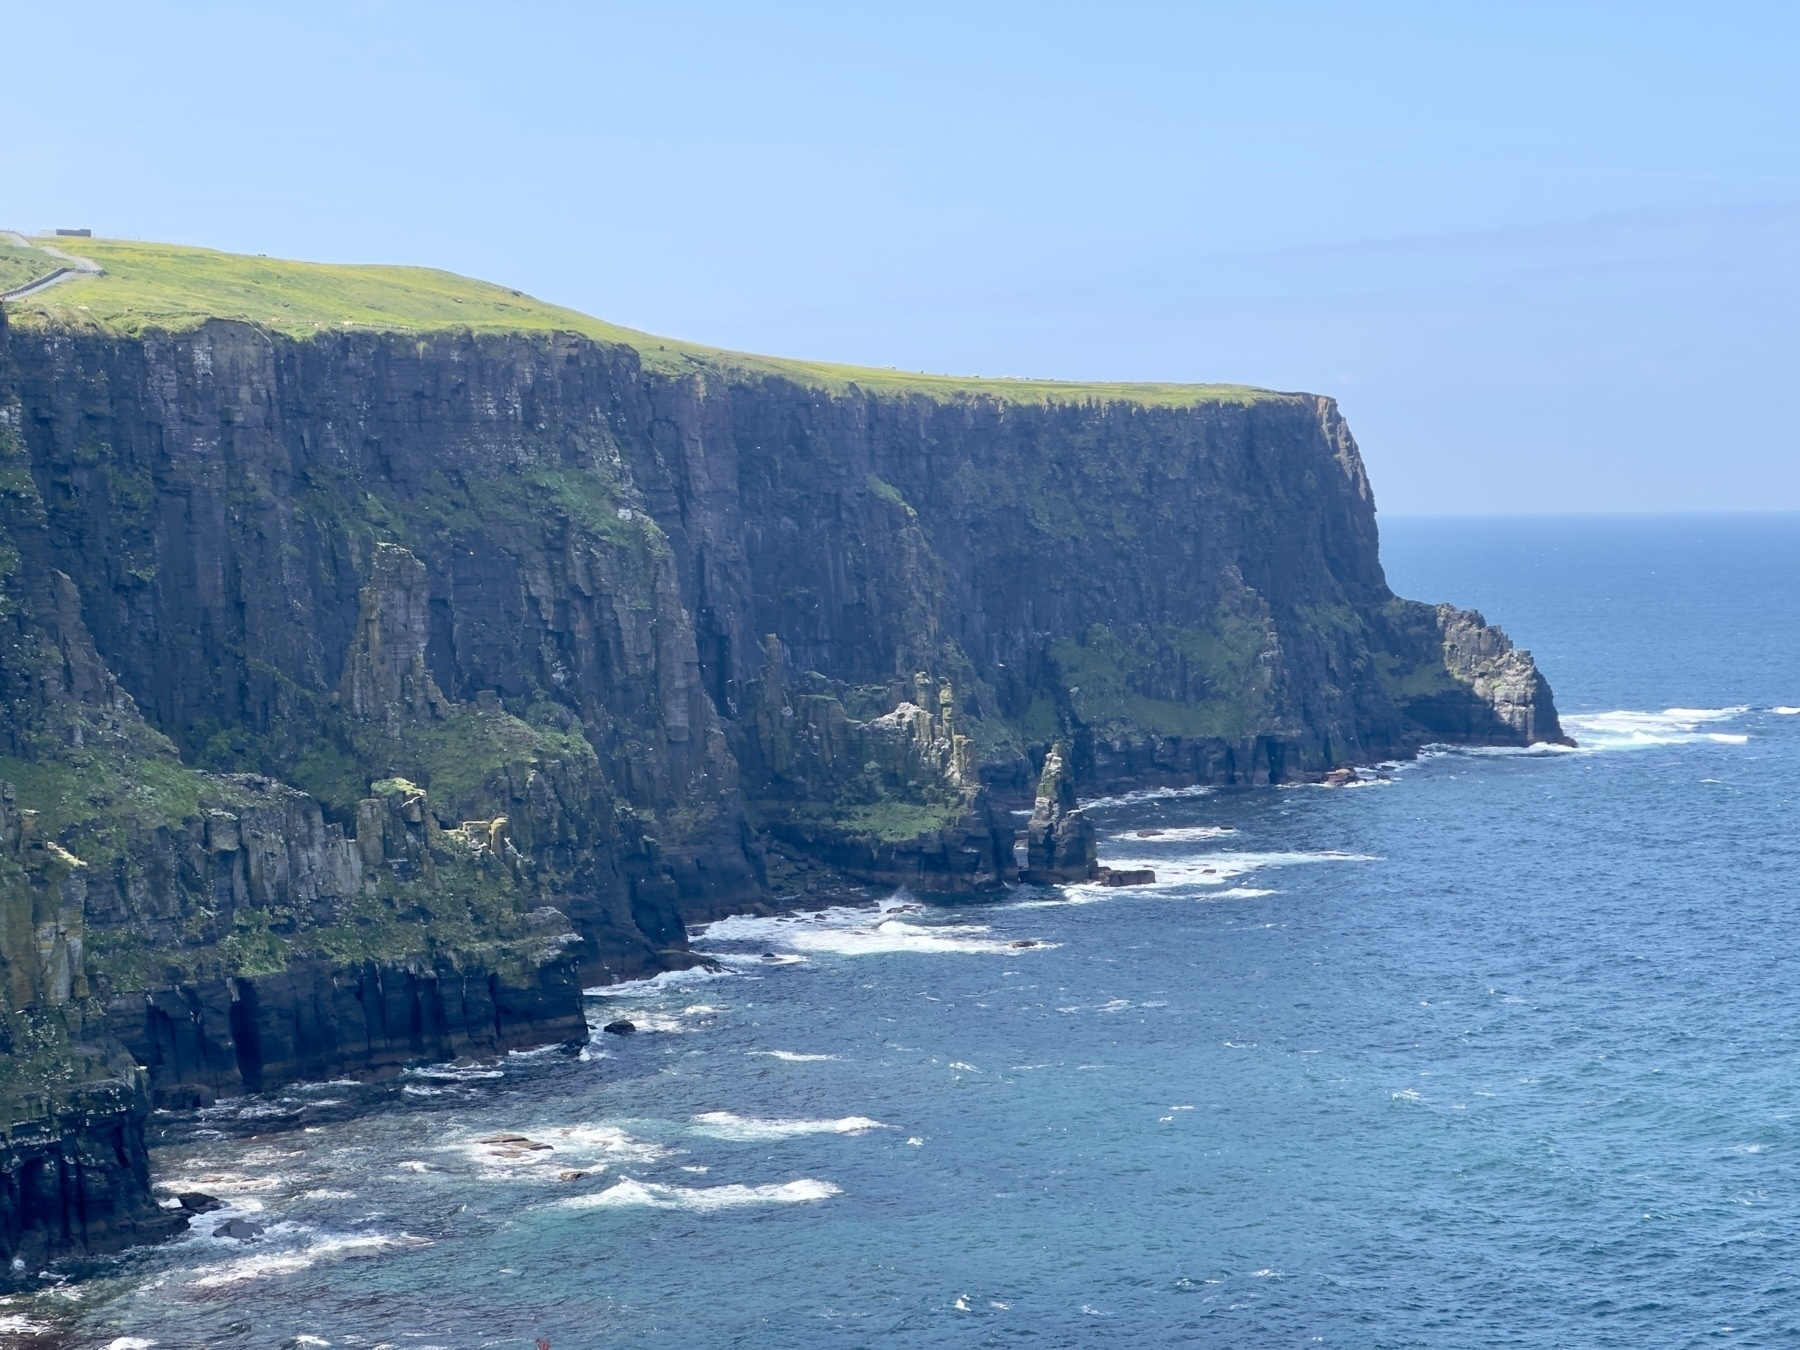 Auto-generated description: A dramatic cliffside meets the expansive ocean under a clear blue sky, with waves crashing against the rocky shore.